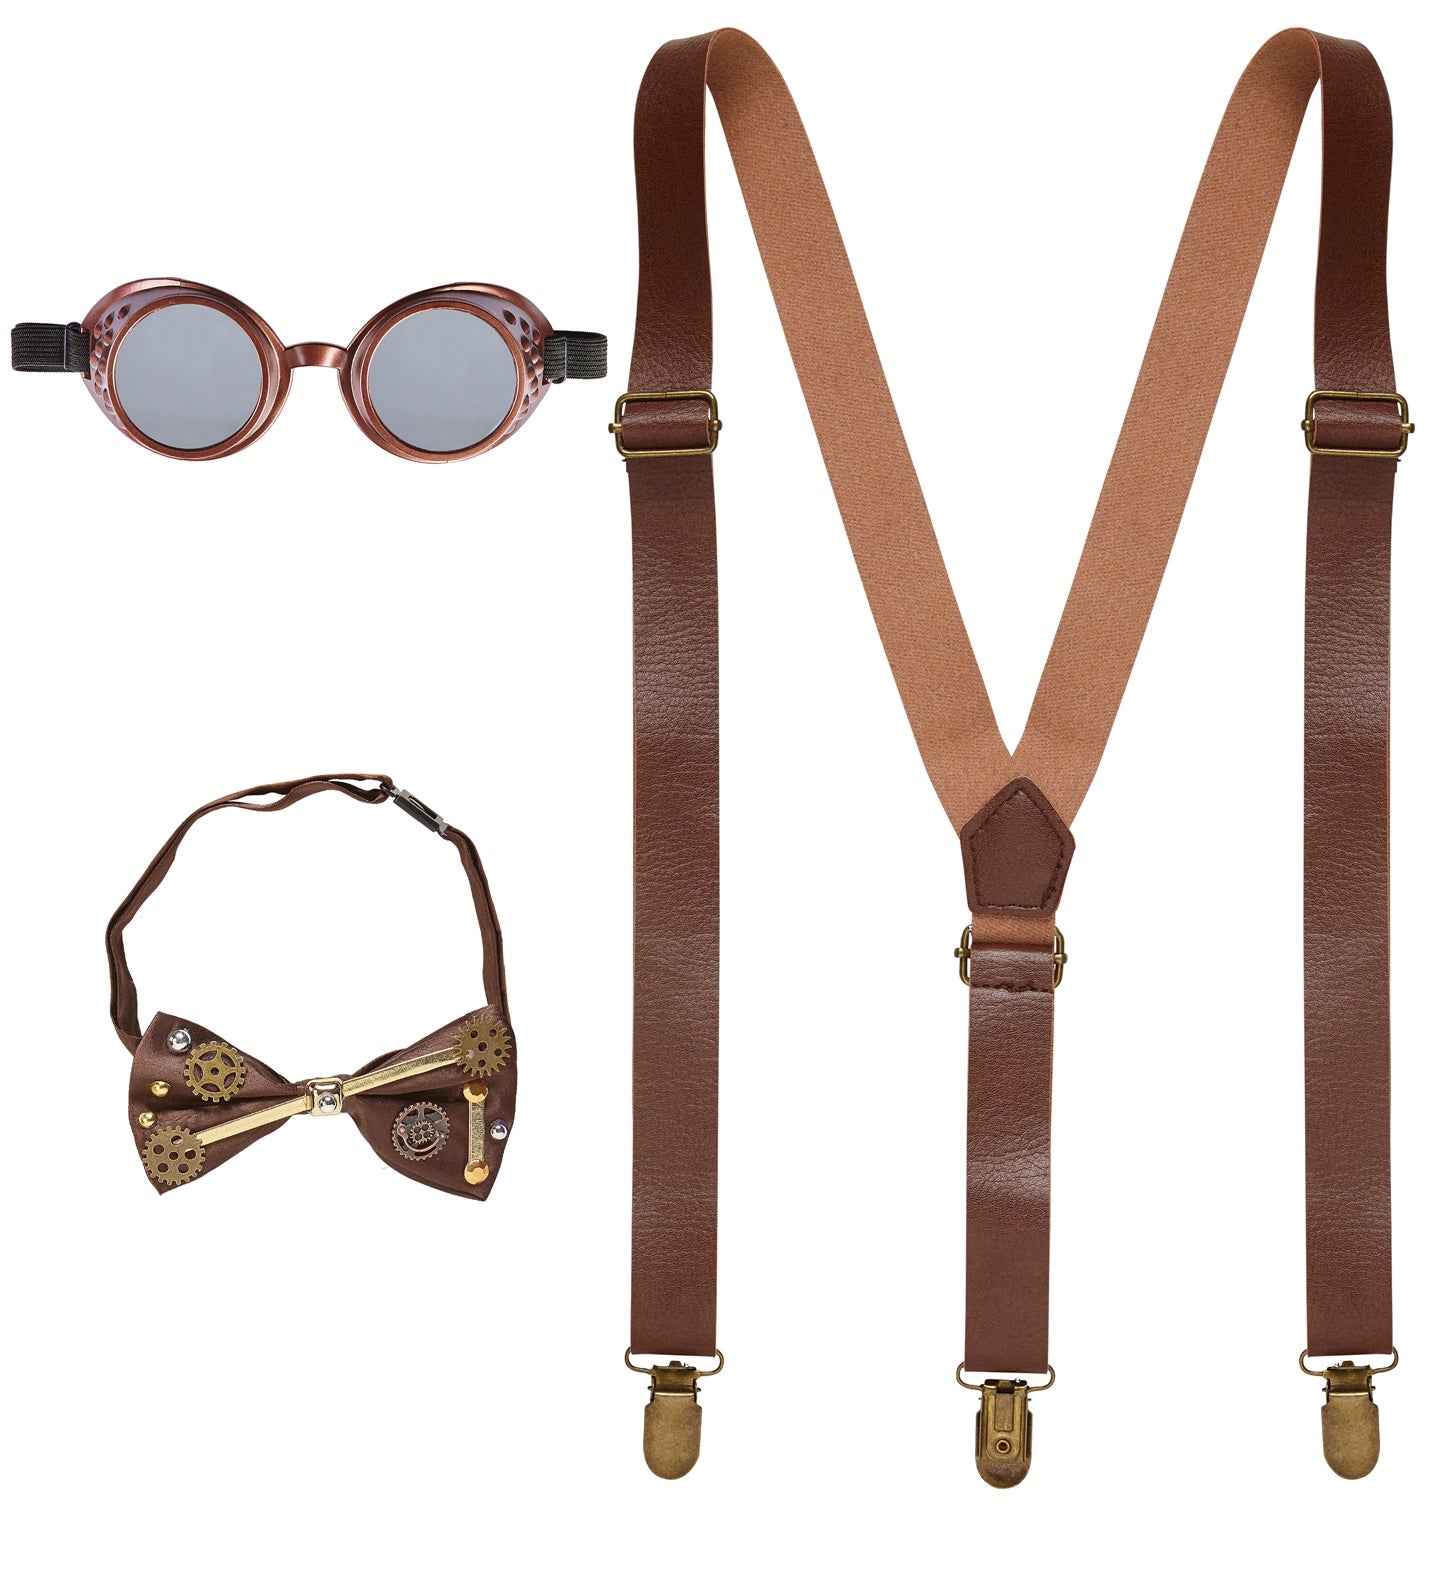 Steampunk Costume goggles, braces and bowtie Set